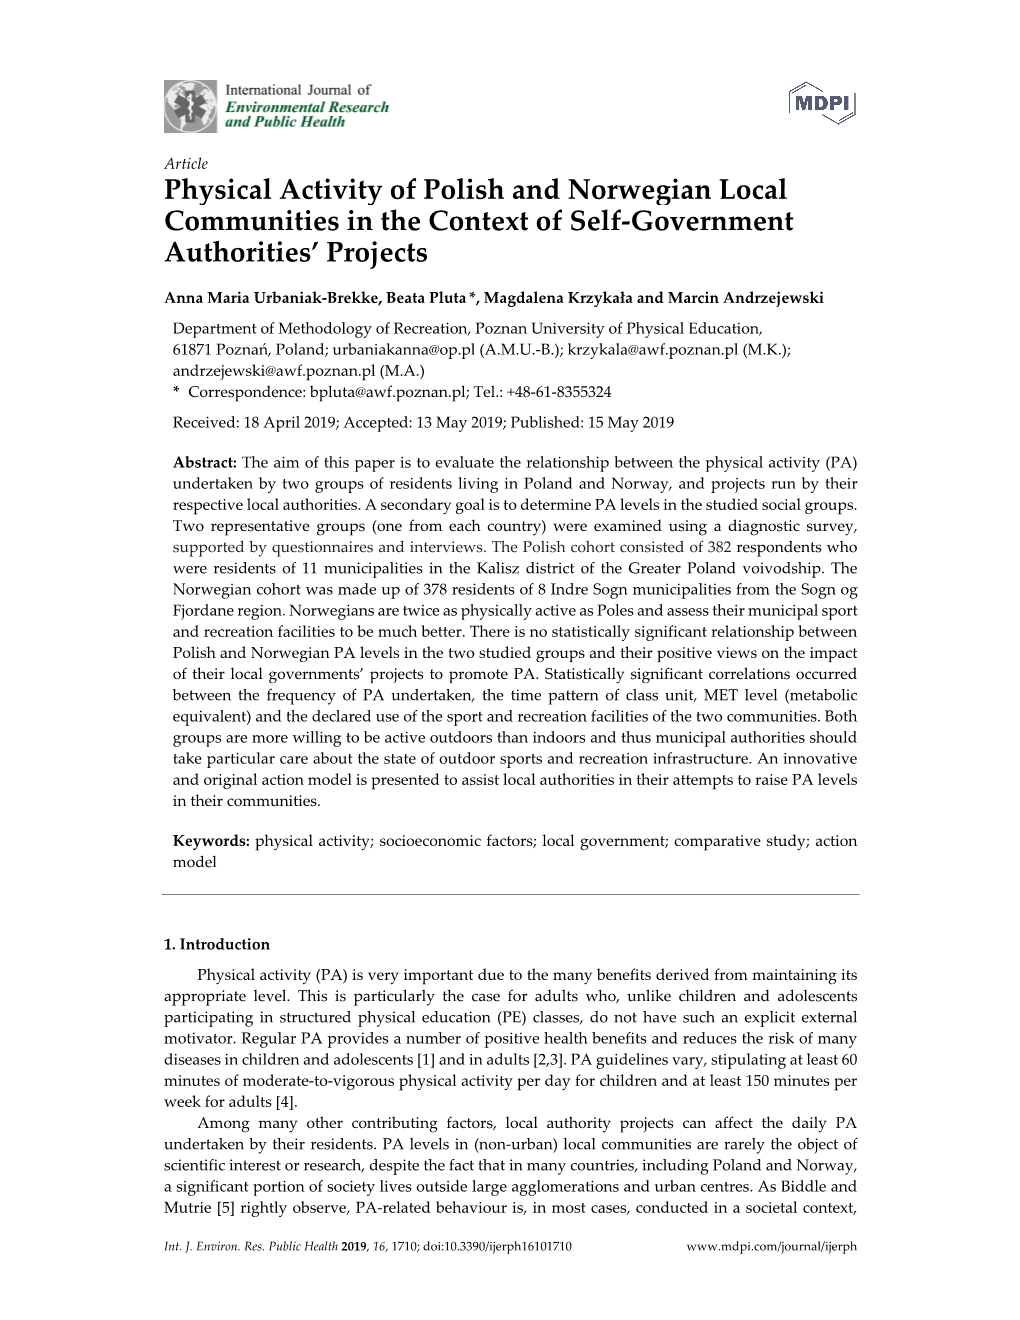 Physical Activity of Polish and Norwegian Local Communities in the Context of Self-Government Authorities’ Projects